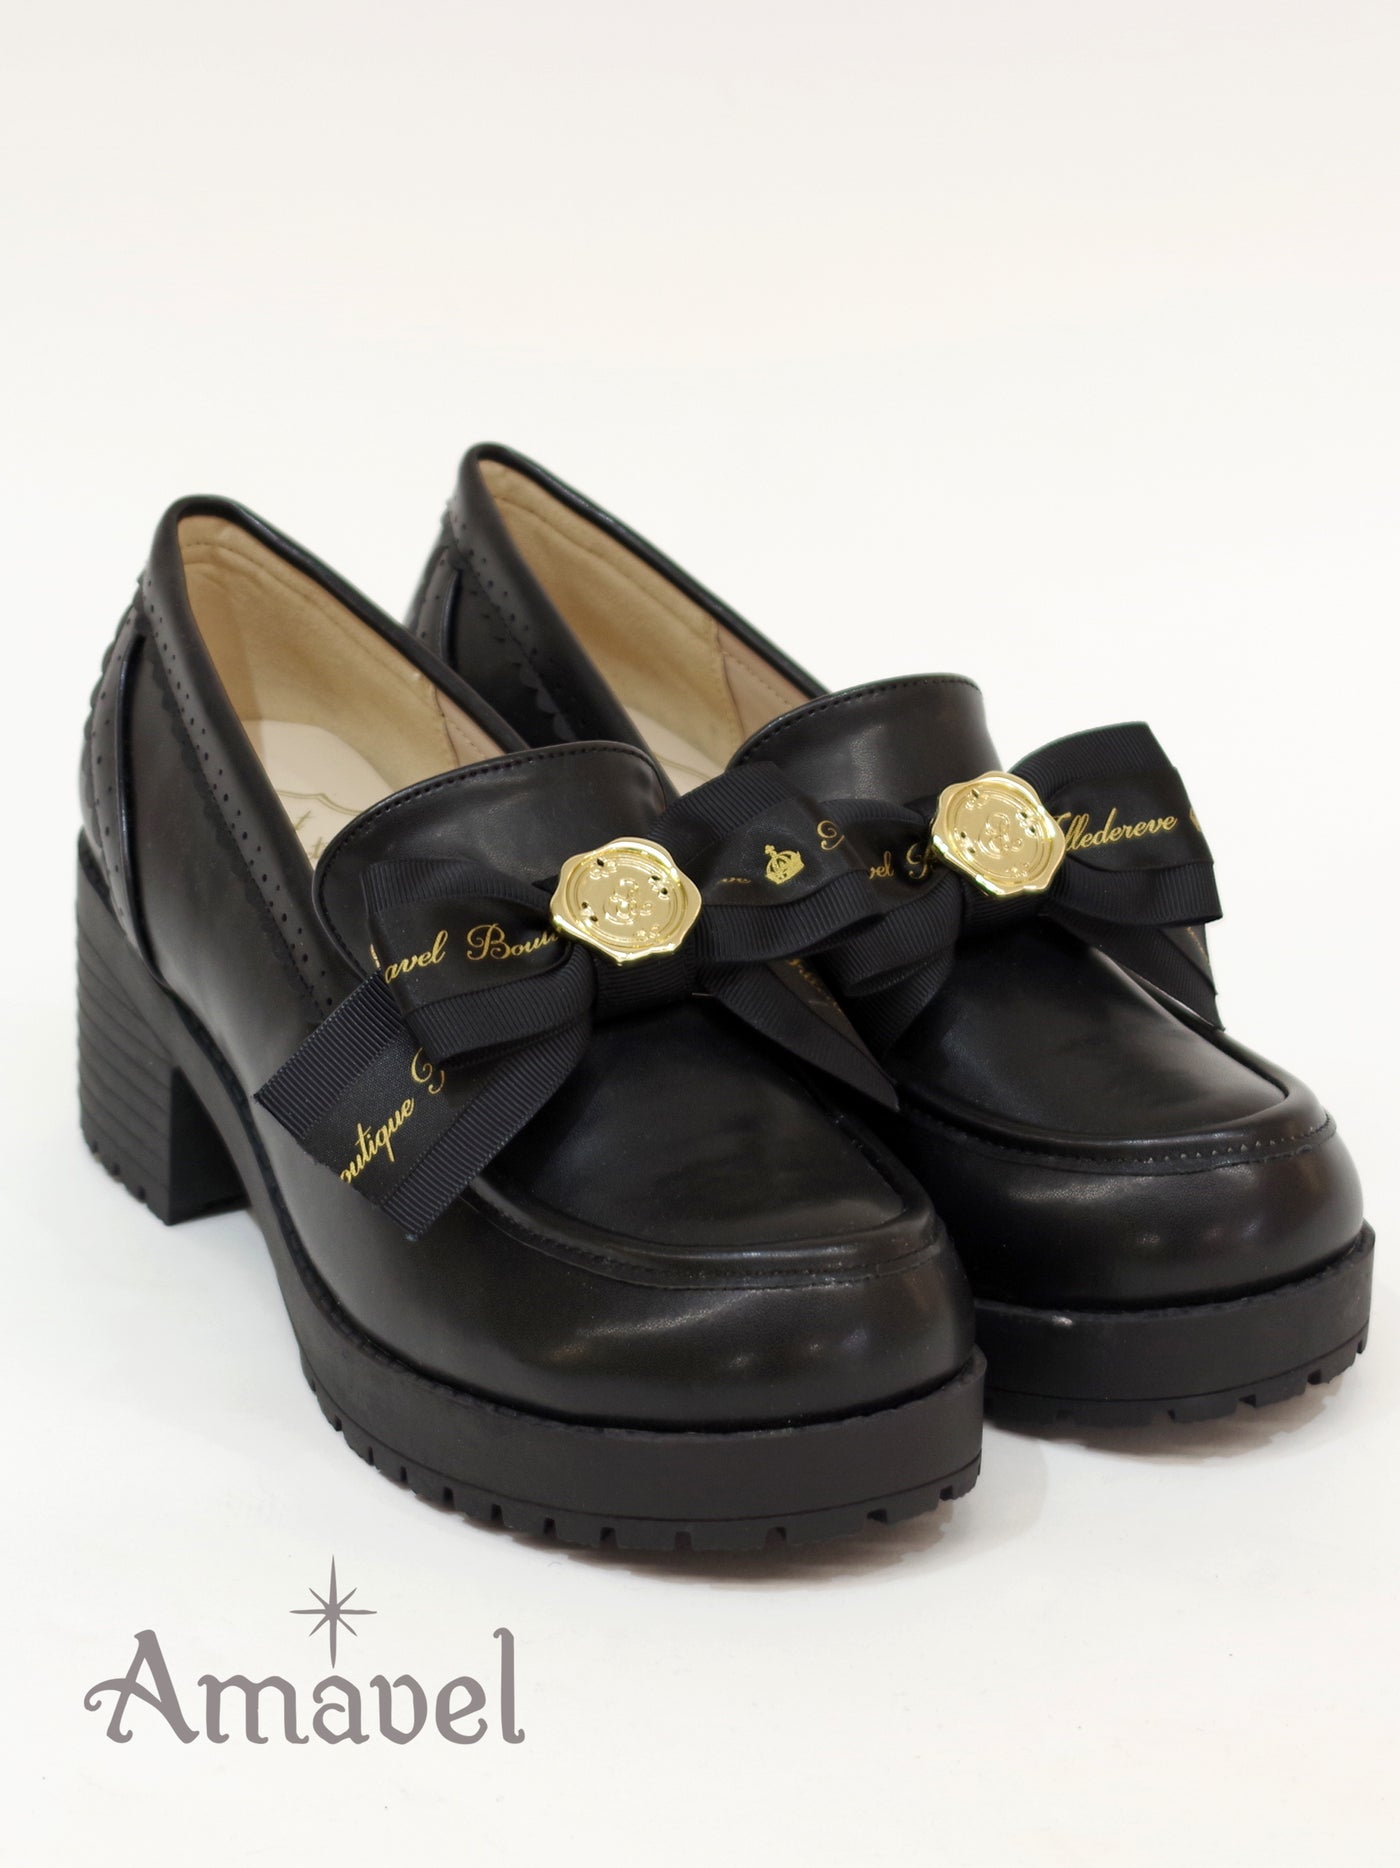 Loafer pumps with message ribbon